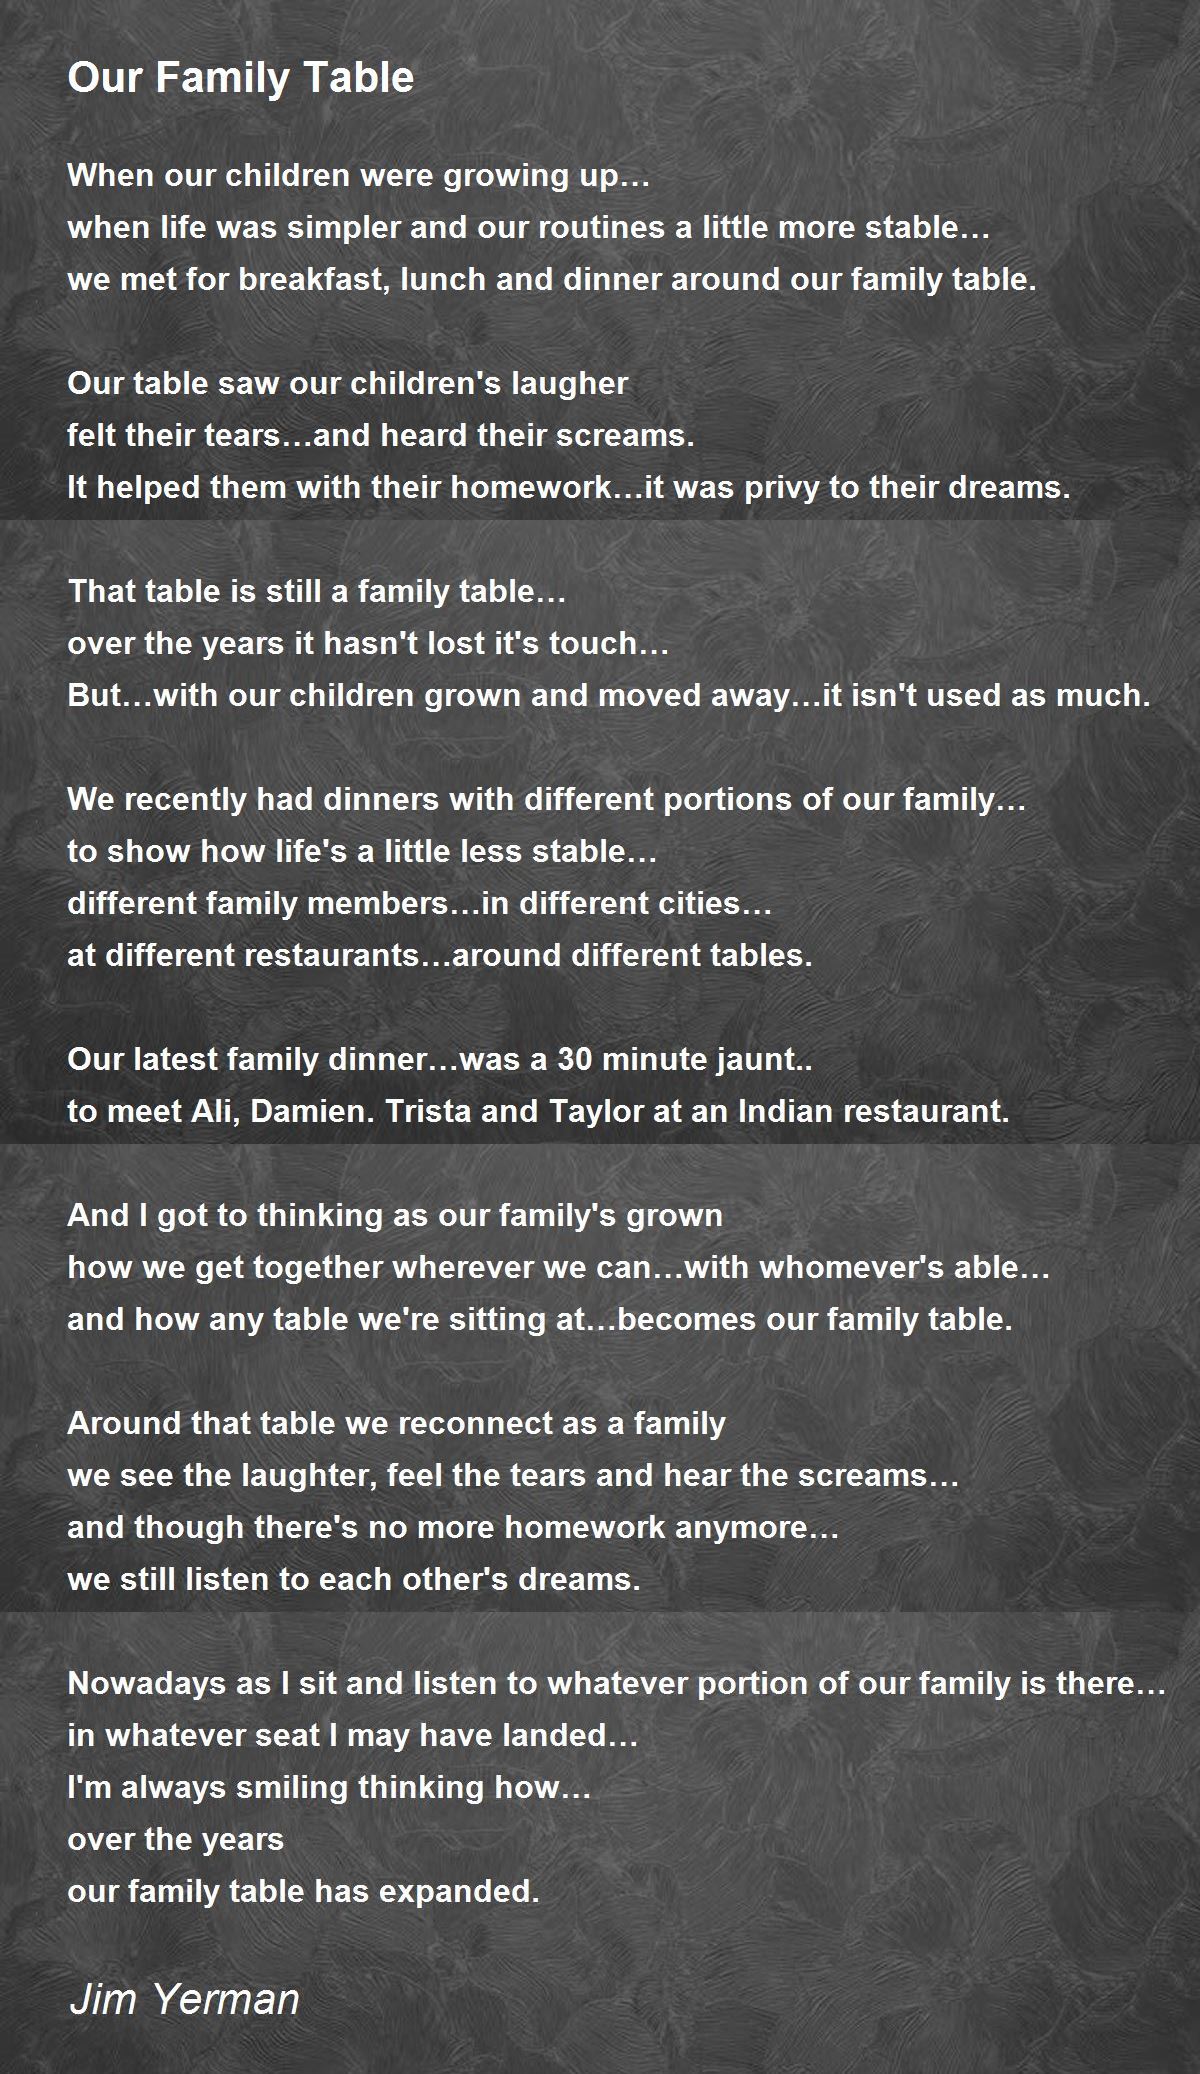 Our Family Table - Our Family Table Poem by Jim Yerman